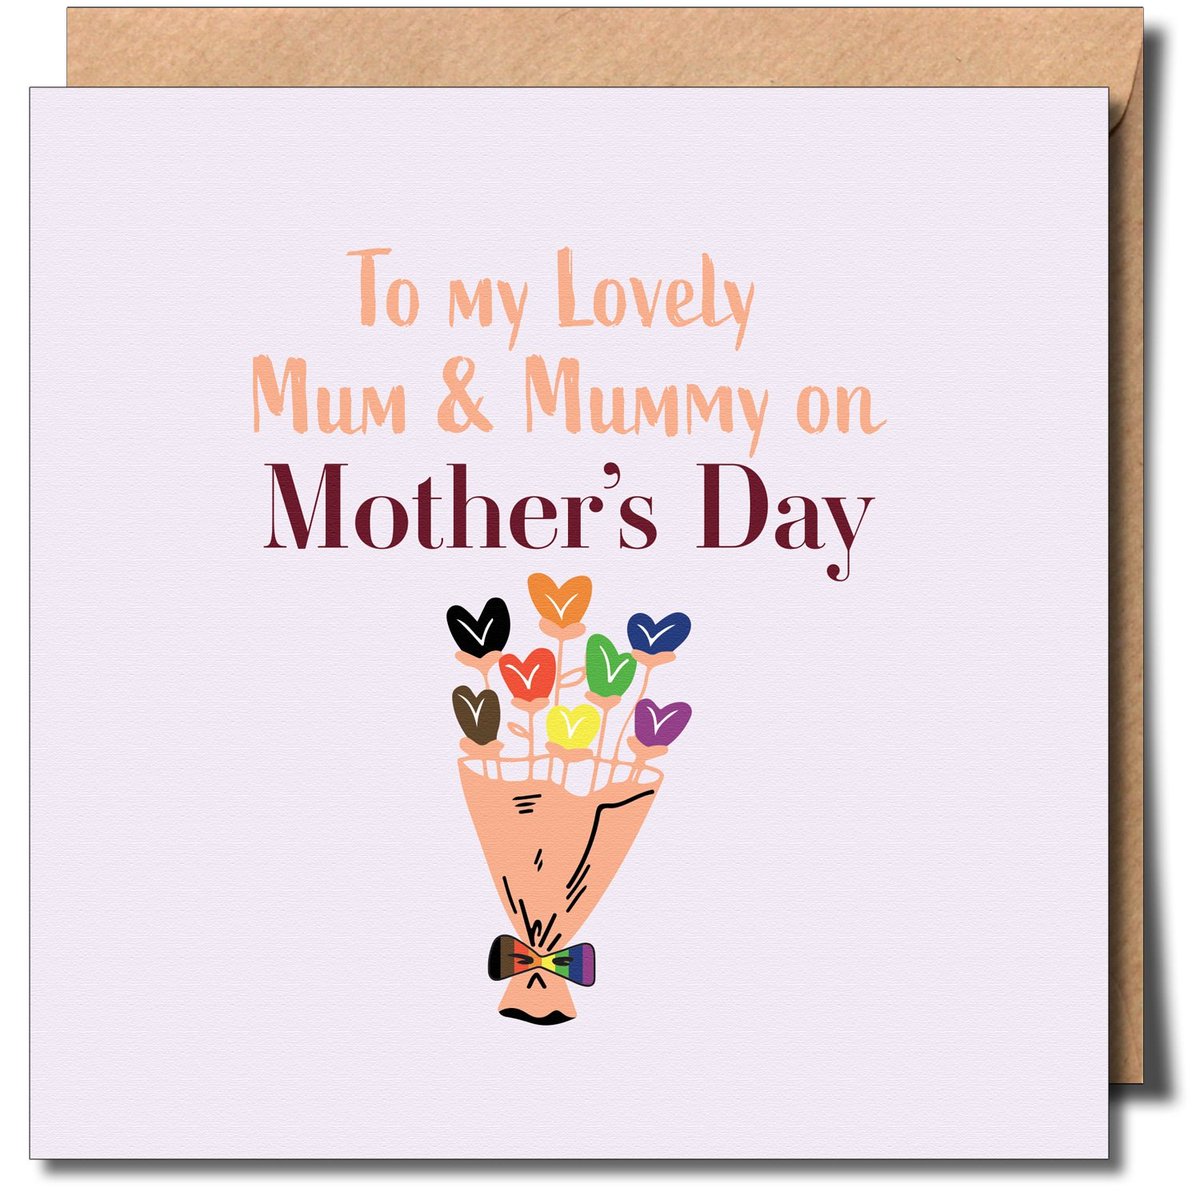 Hi Everyone ❤️ Gorgeous Mother's Day Card 🌈 Visit linktr.ee/julieswp to shop 🌈 #womaninbizhour #MHHSBD #EarlyBiz #shopindie #twomums Please rt X